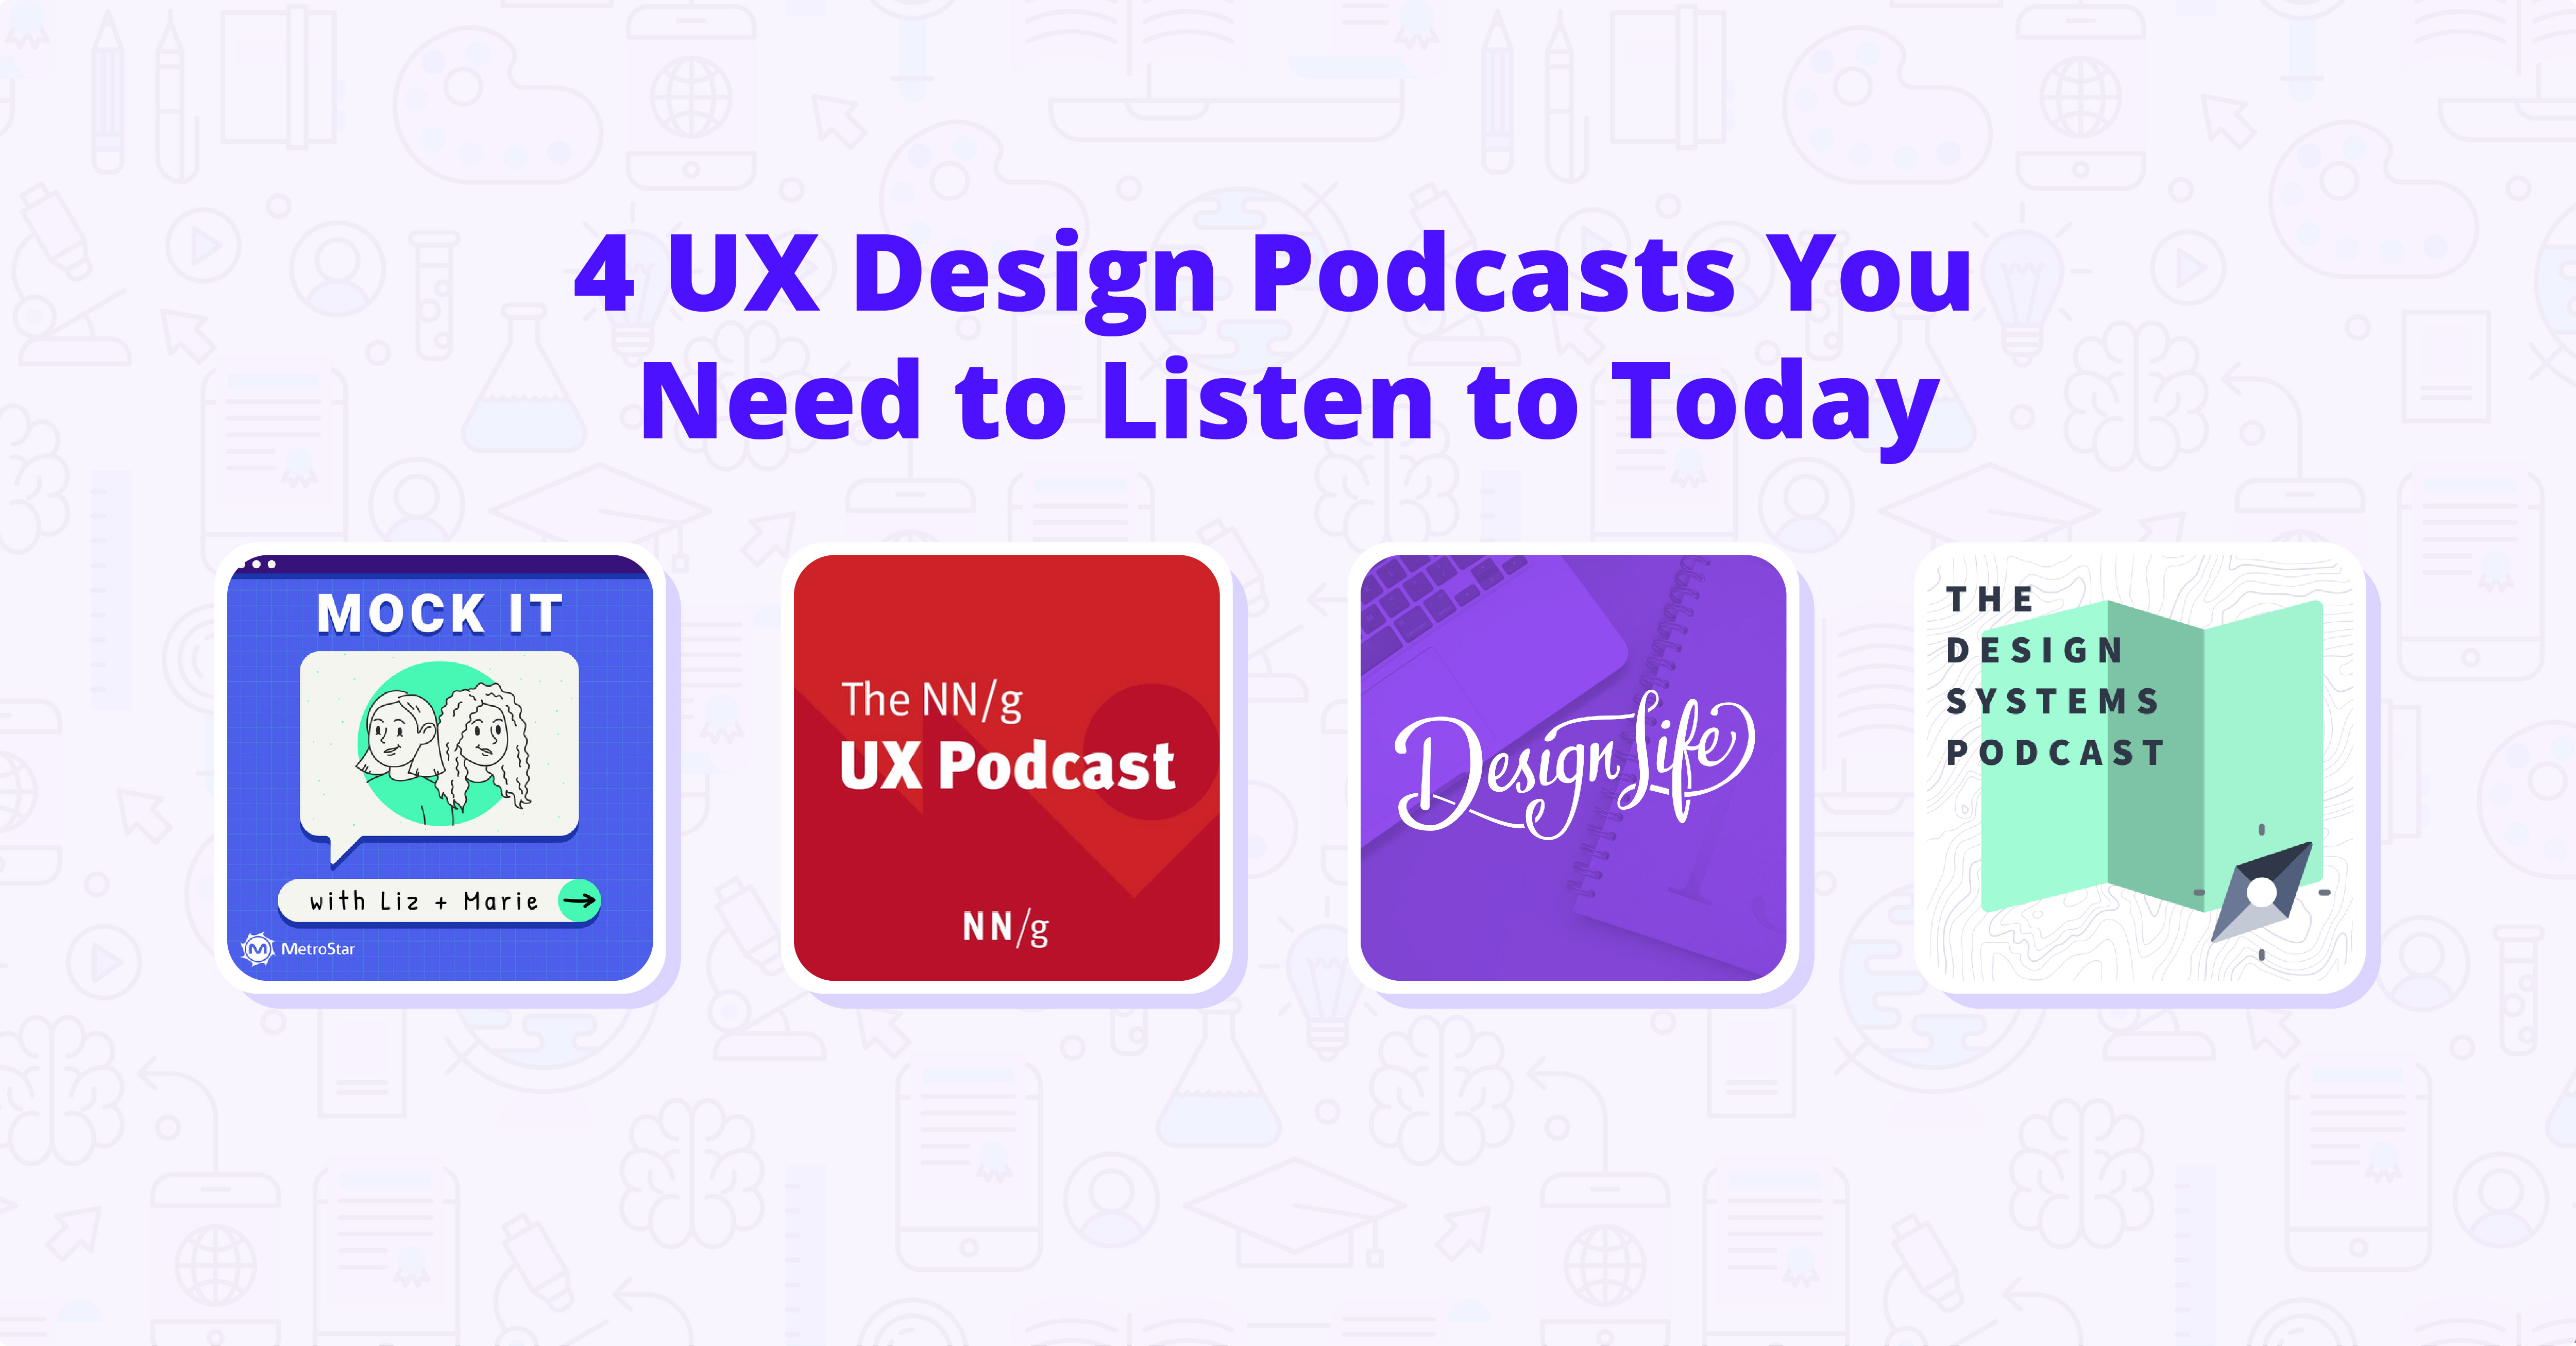 4 UX Design Podcasts You Need to Listen to Today